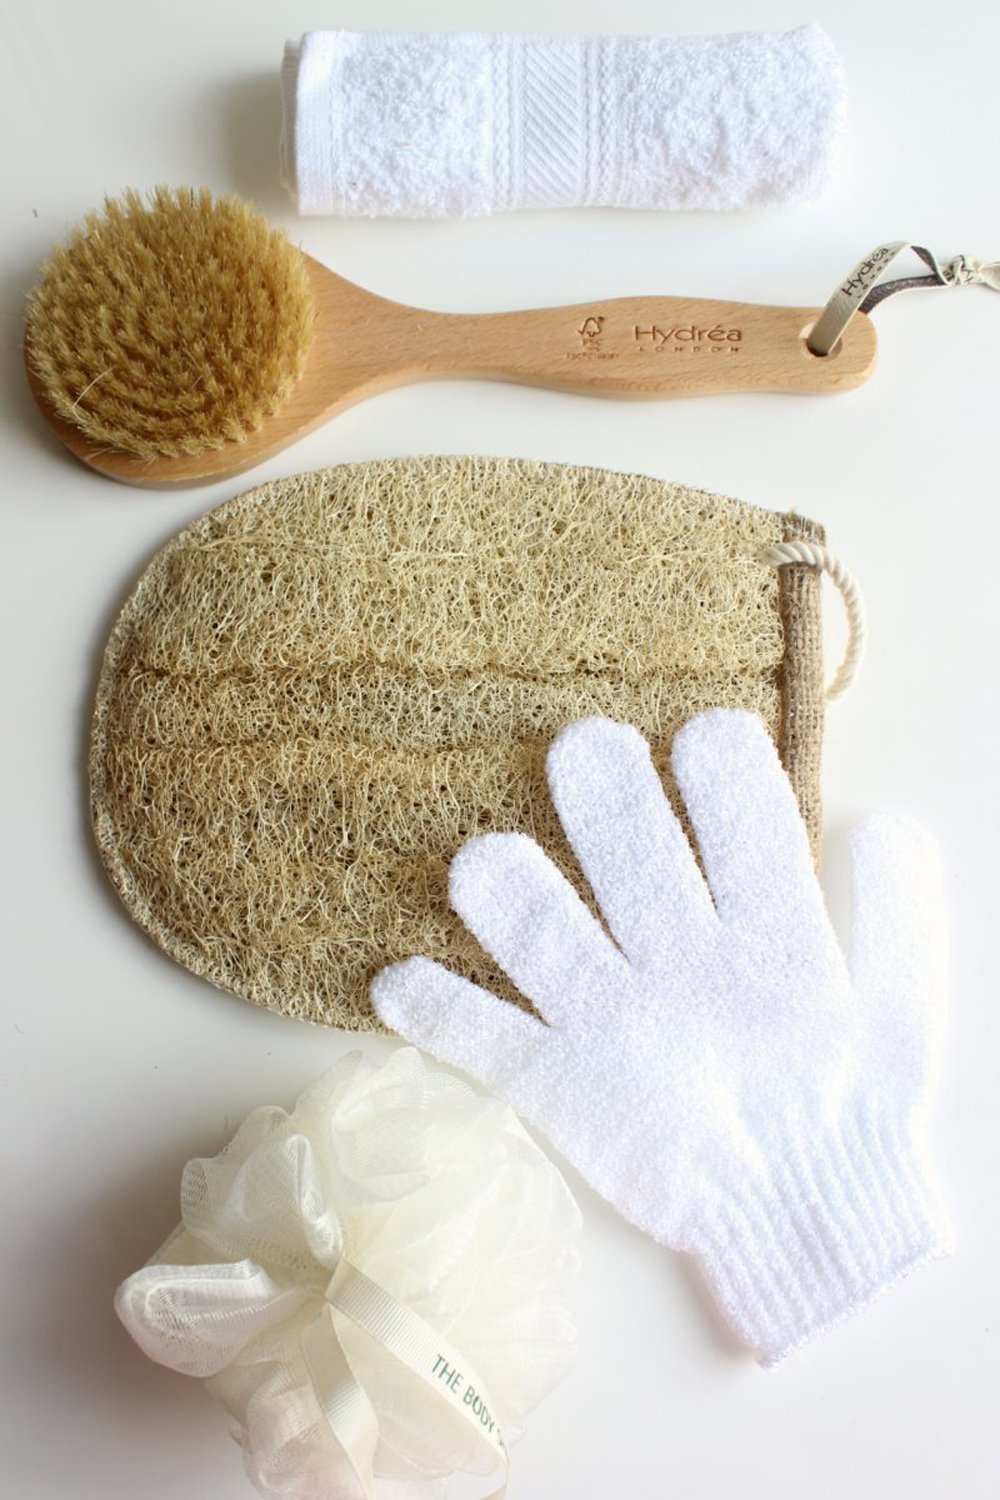 5 Best Body Exfoliator Tools for the Smoothest Skin Ever